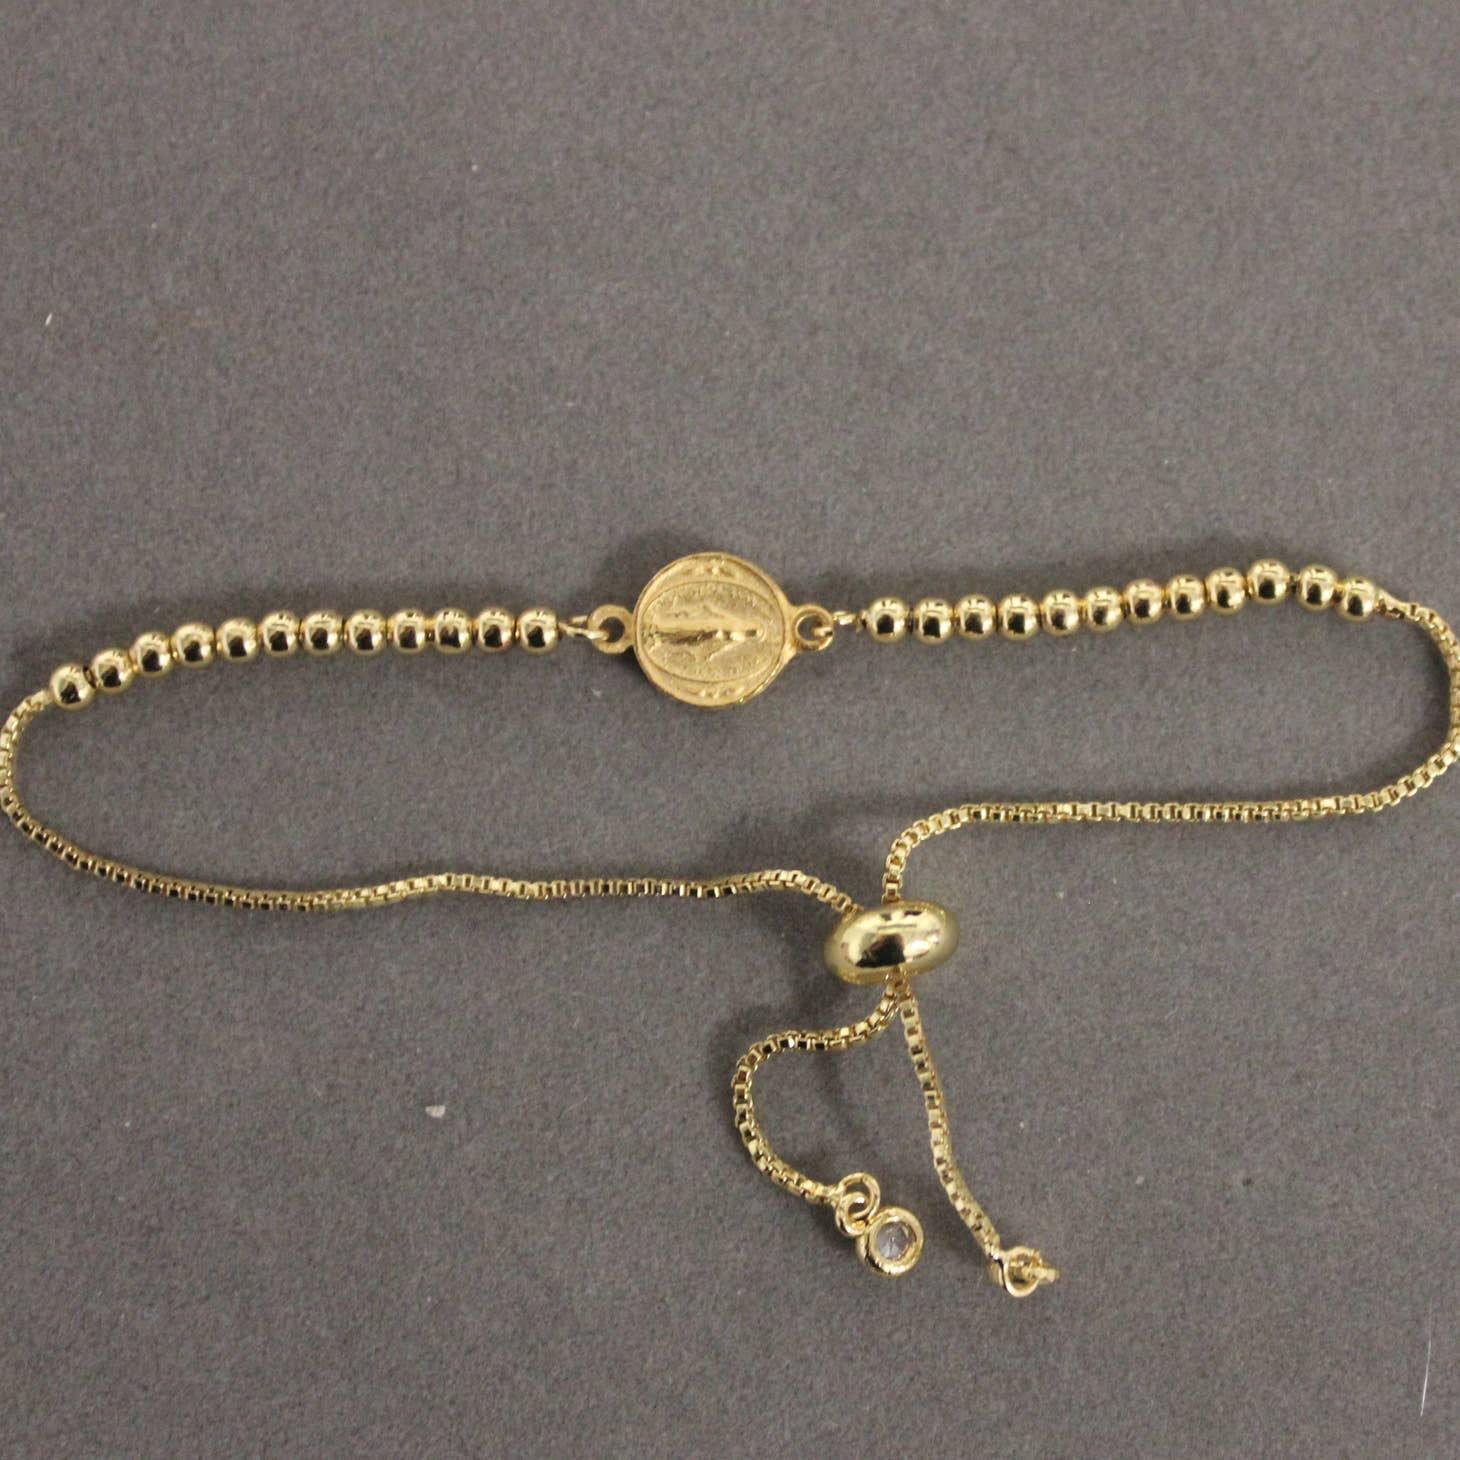 An Adjustable Virgin Mary Double Sided Gold Bead Bracelet by Weisinger Designs with a coin on it.